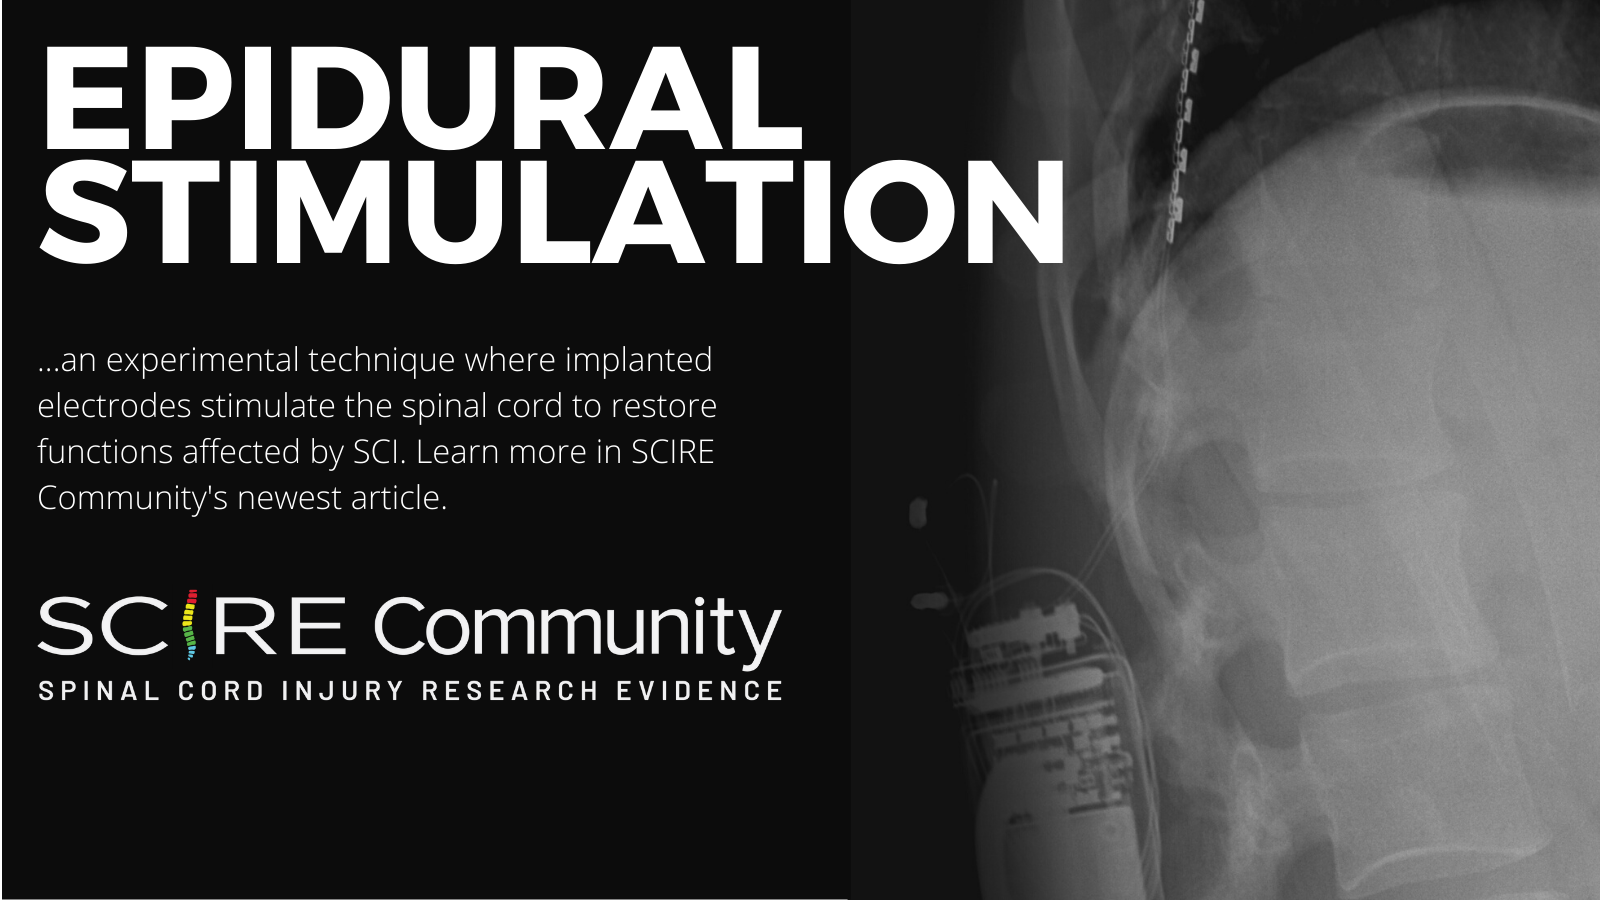 X-ray image: spine with wires and electrodes in the spinal cord on a black background White text on black background: Epidural stimulation ...an experimental technique where implanted electrodes stimulate the spinal cord to restore functions affected by SCI. Learn more in SCIRE Community's newest article. SCIRE Community logo Spinal Cord Injury Research Evidence